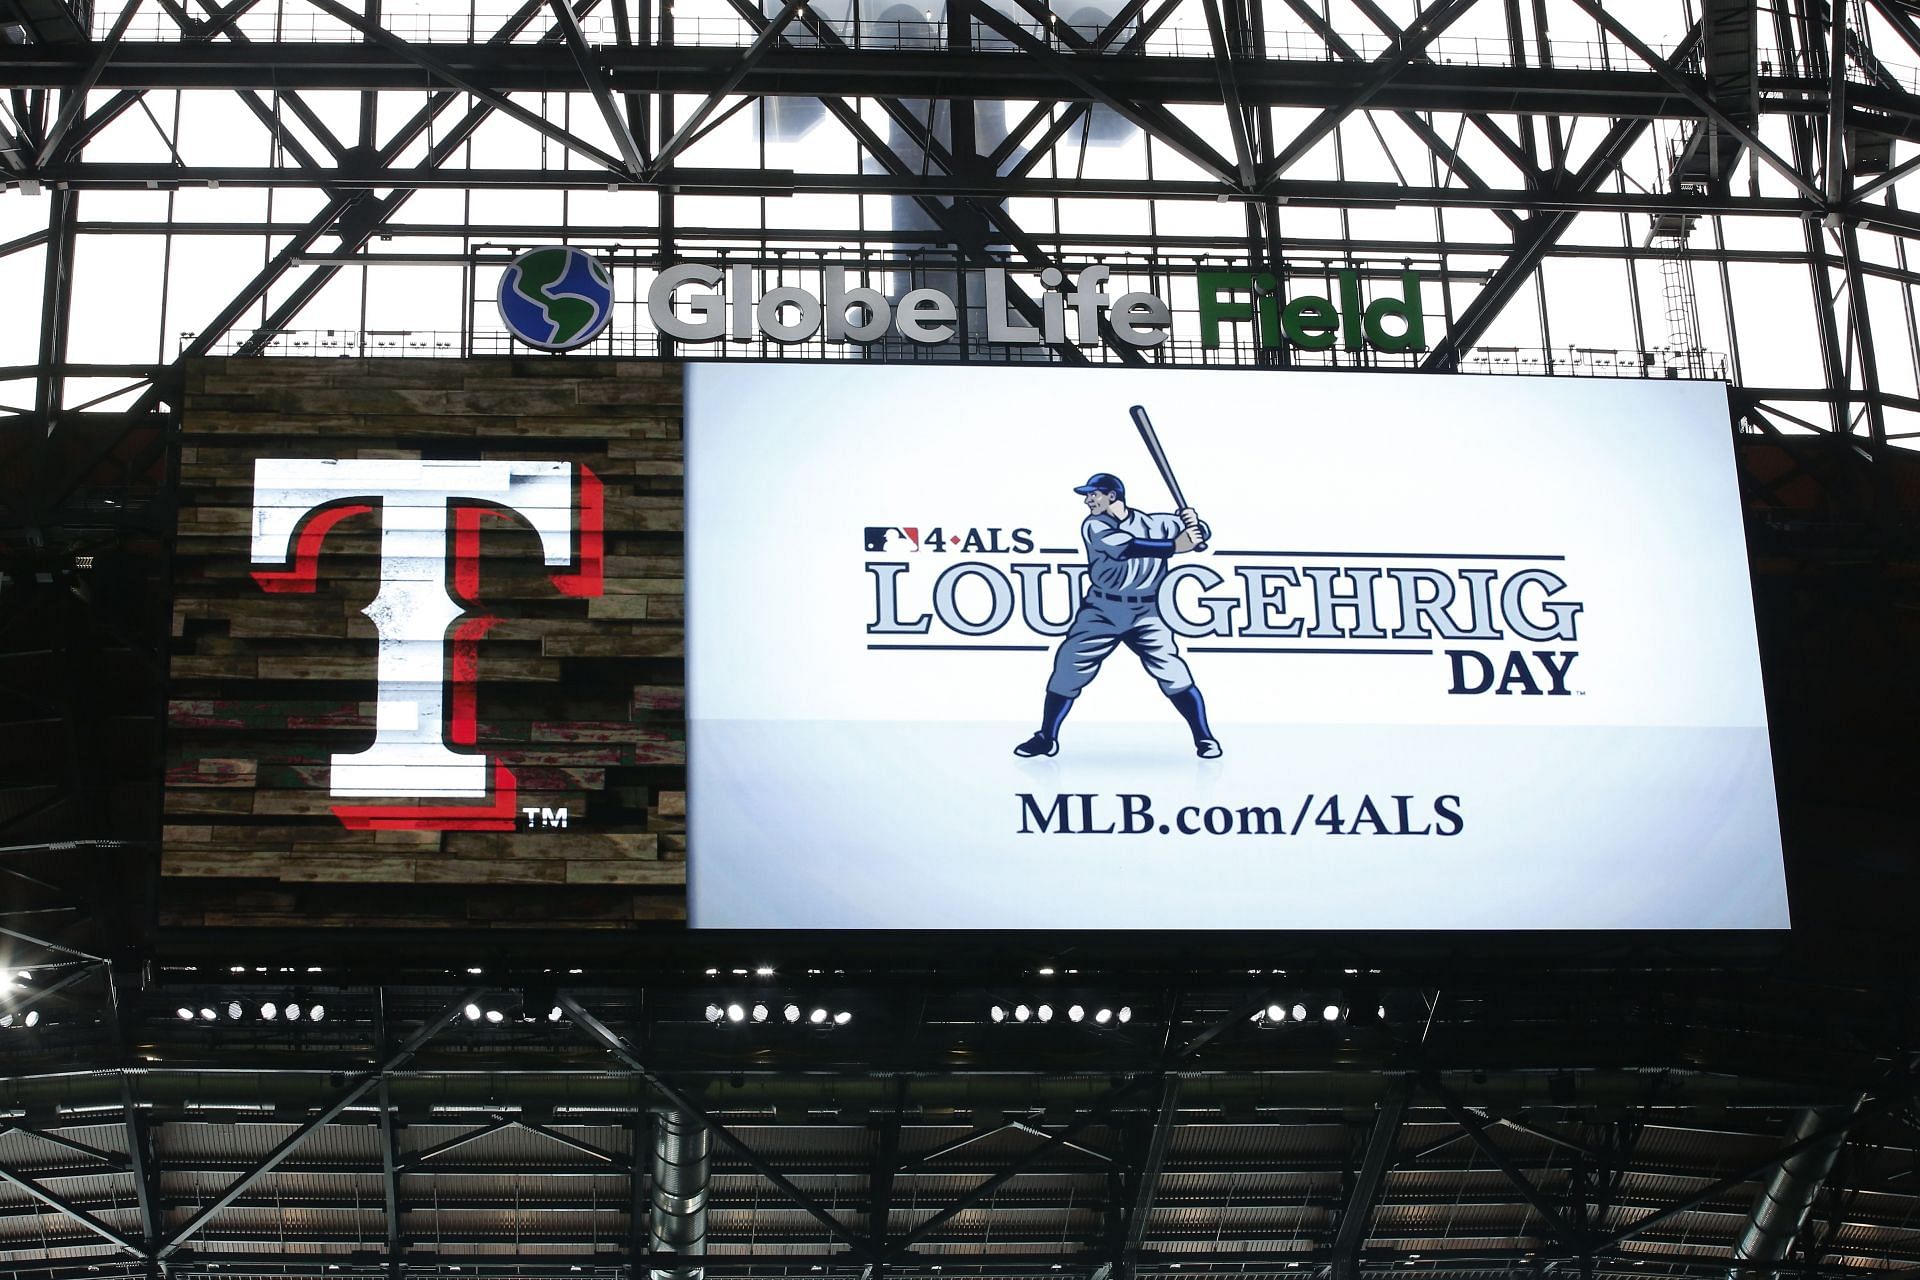 Major League Baseball to have annual Lou Gehrig Day on June 2 - ESPN